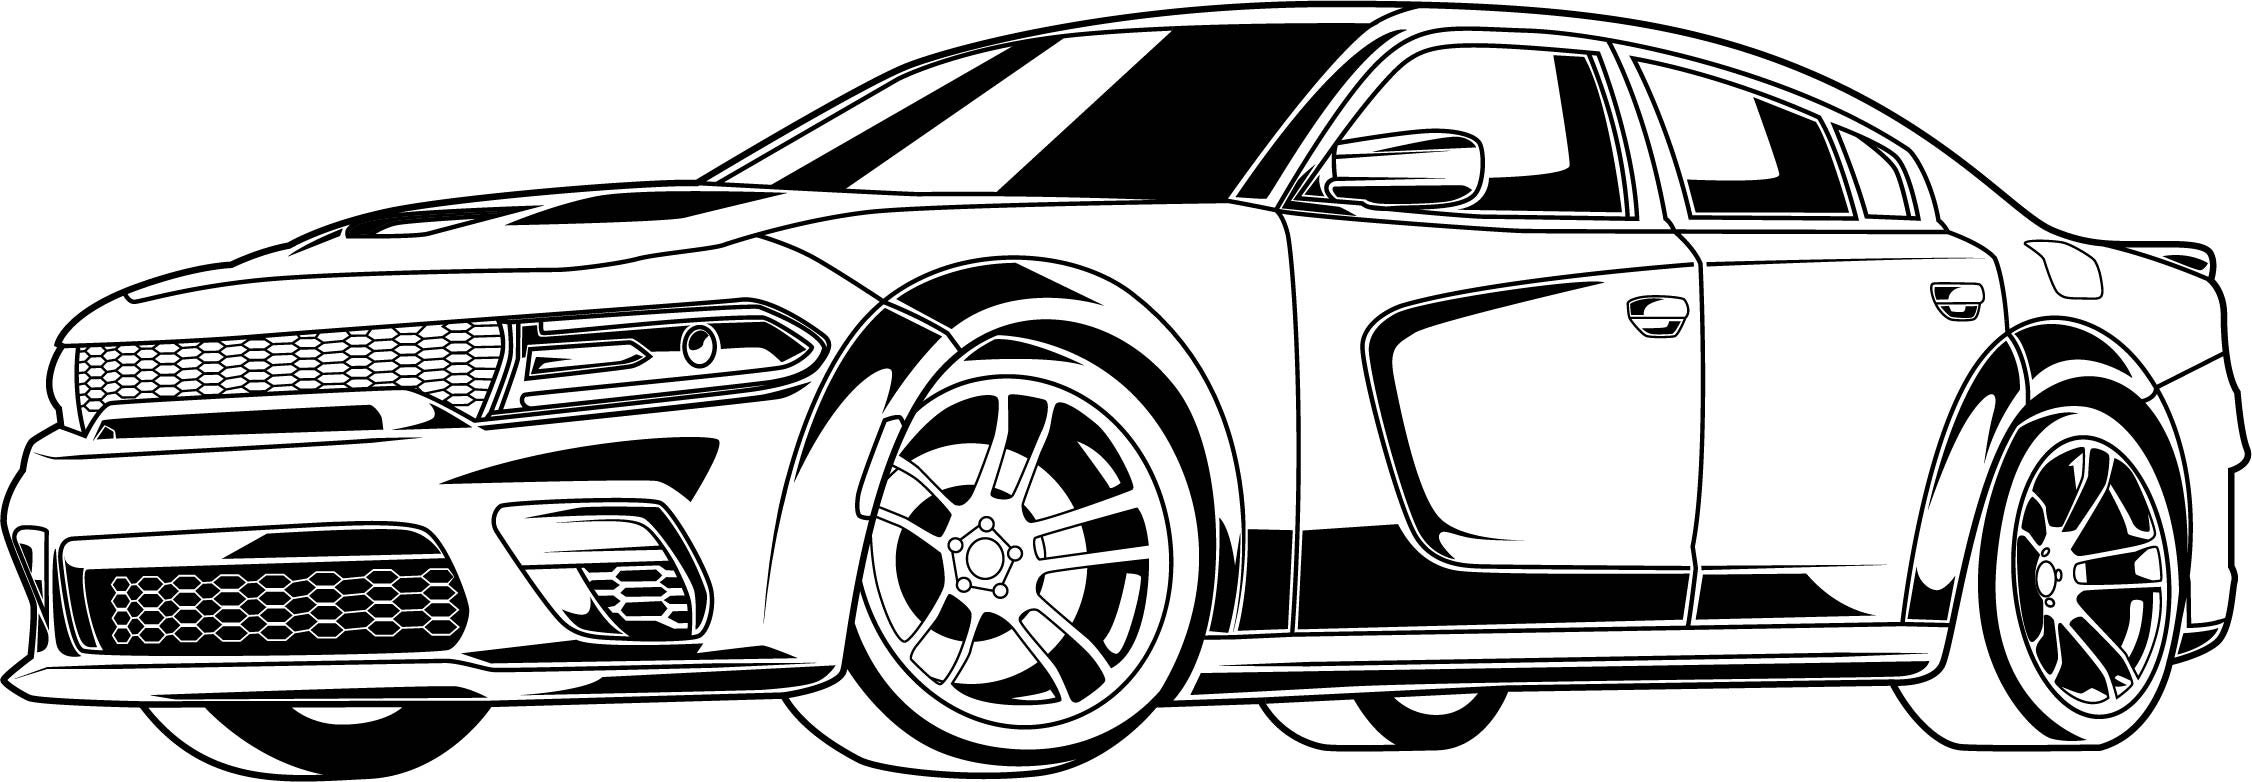 Doms Charger Coloring Pages